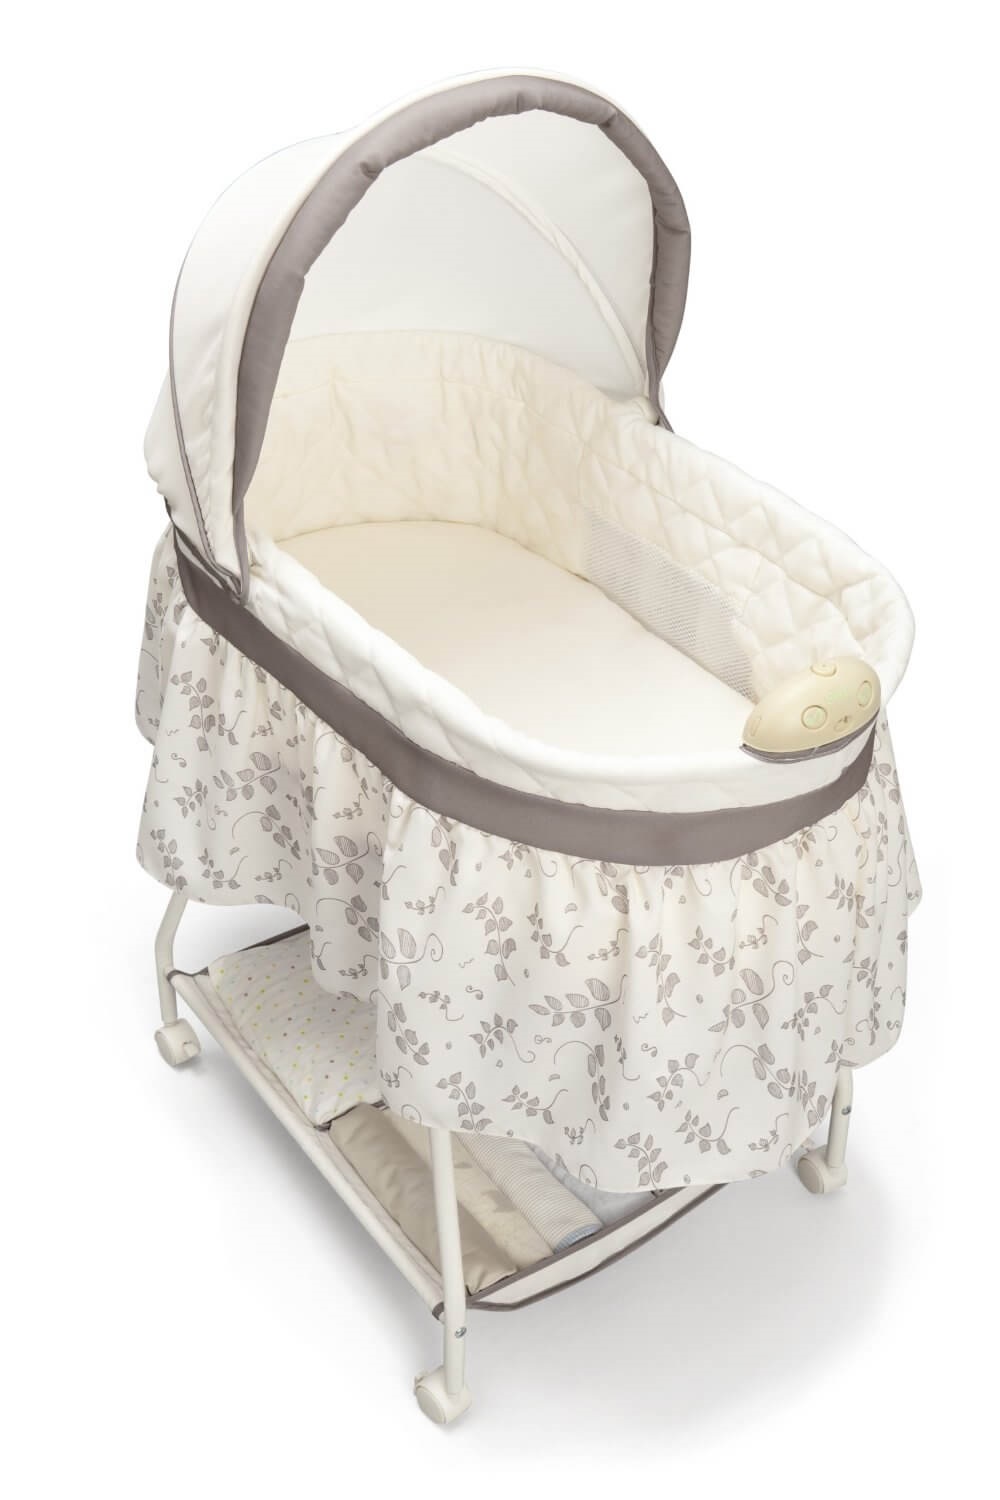 do you need a bassinet for a newborn